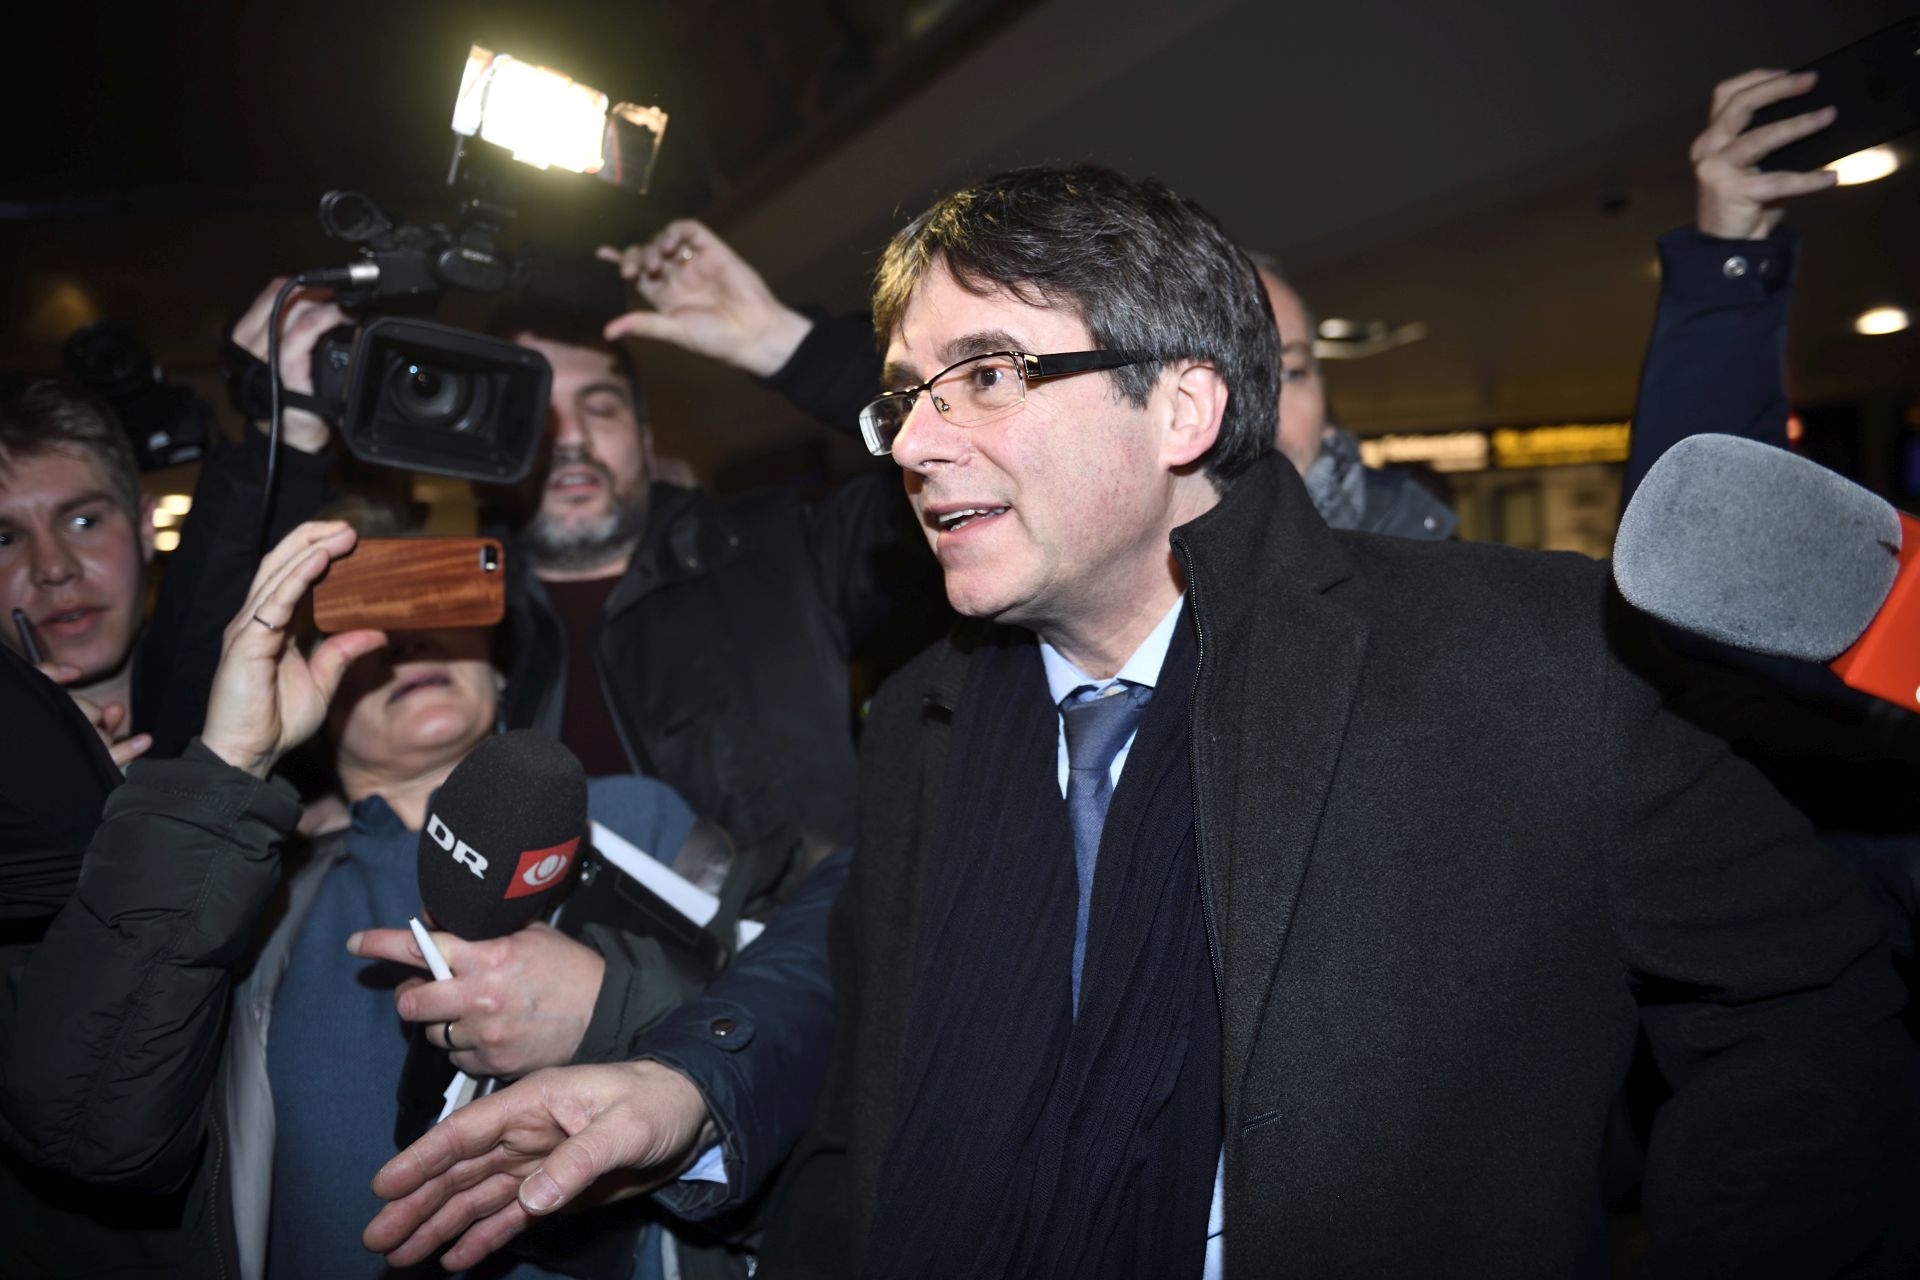 epa06463941 Former Catalan President Carles Puigdemont arrives at Copenhagen Airport, Dernmark, 22 January 2018. The Spanish state prosecutor office announced a day earlier that it will issue a European arrest warrent if the former Catalonian President left Beligum, which he is in exhile since the failed secession referendum for Catalonia in October 2017.  EPA/TARIQ MIKKEL KHAN  DENMARK OUT